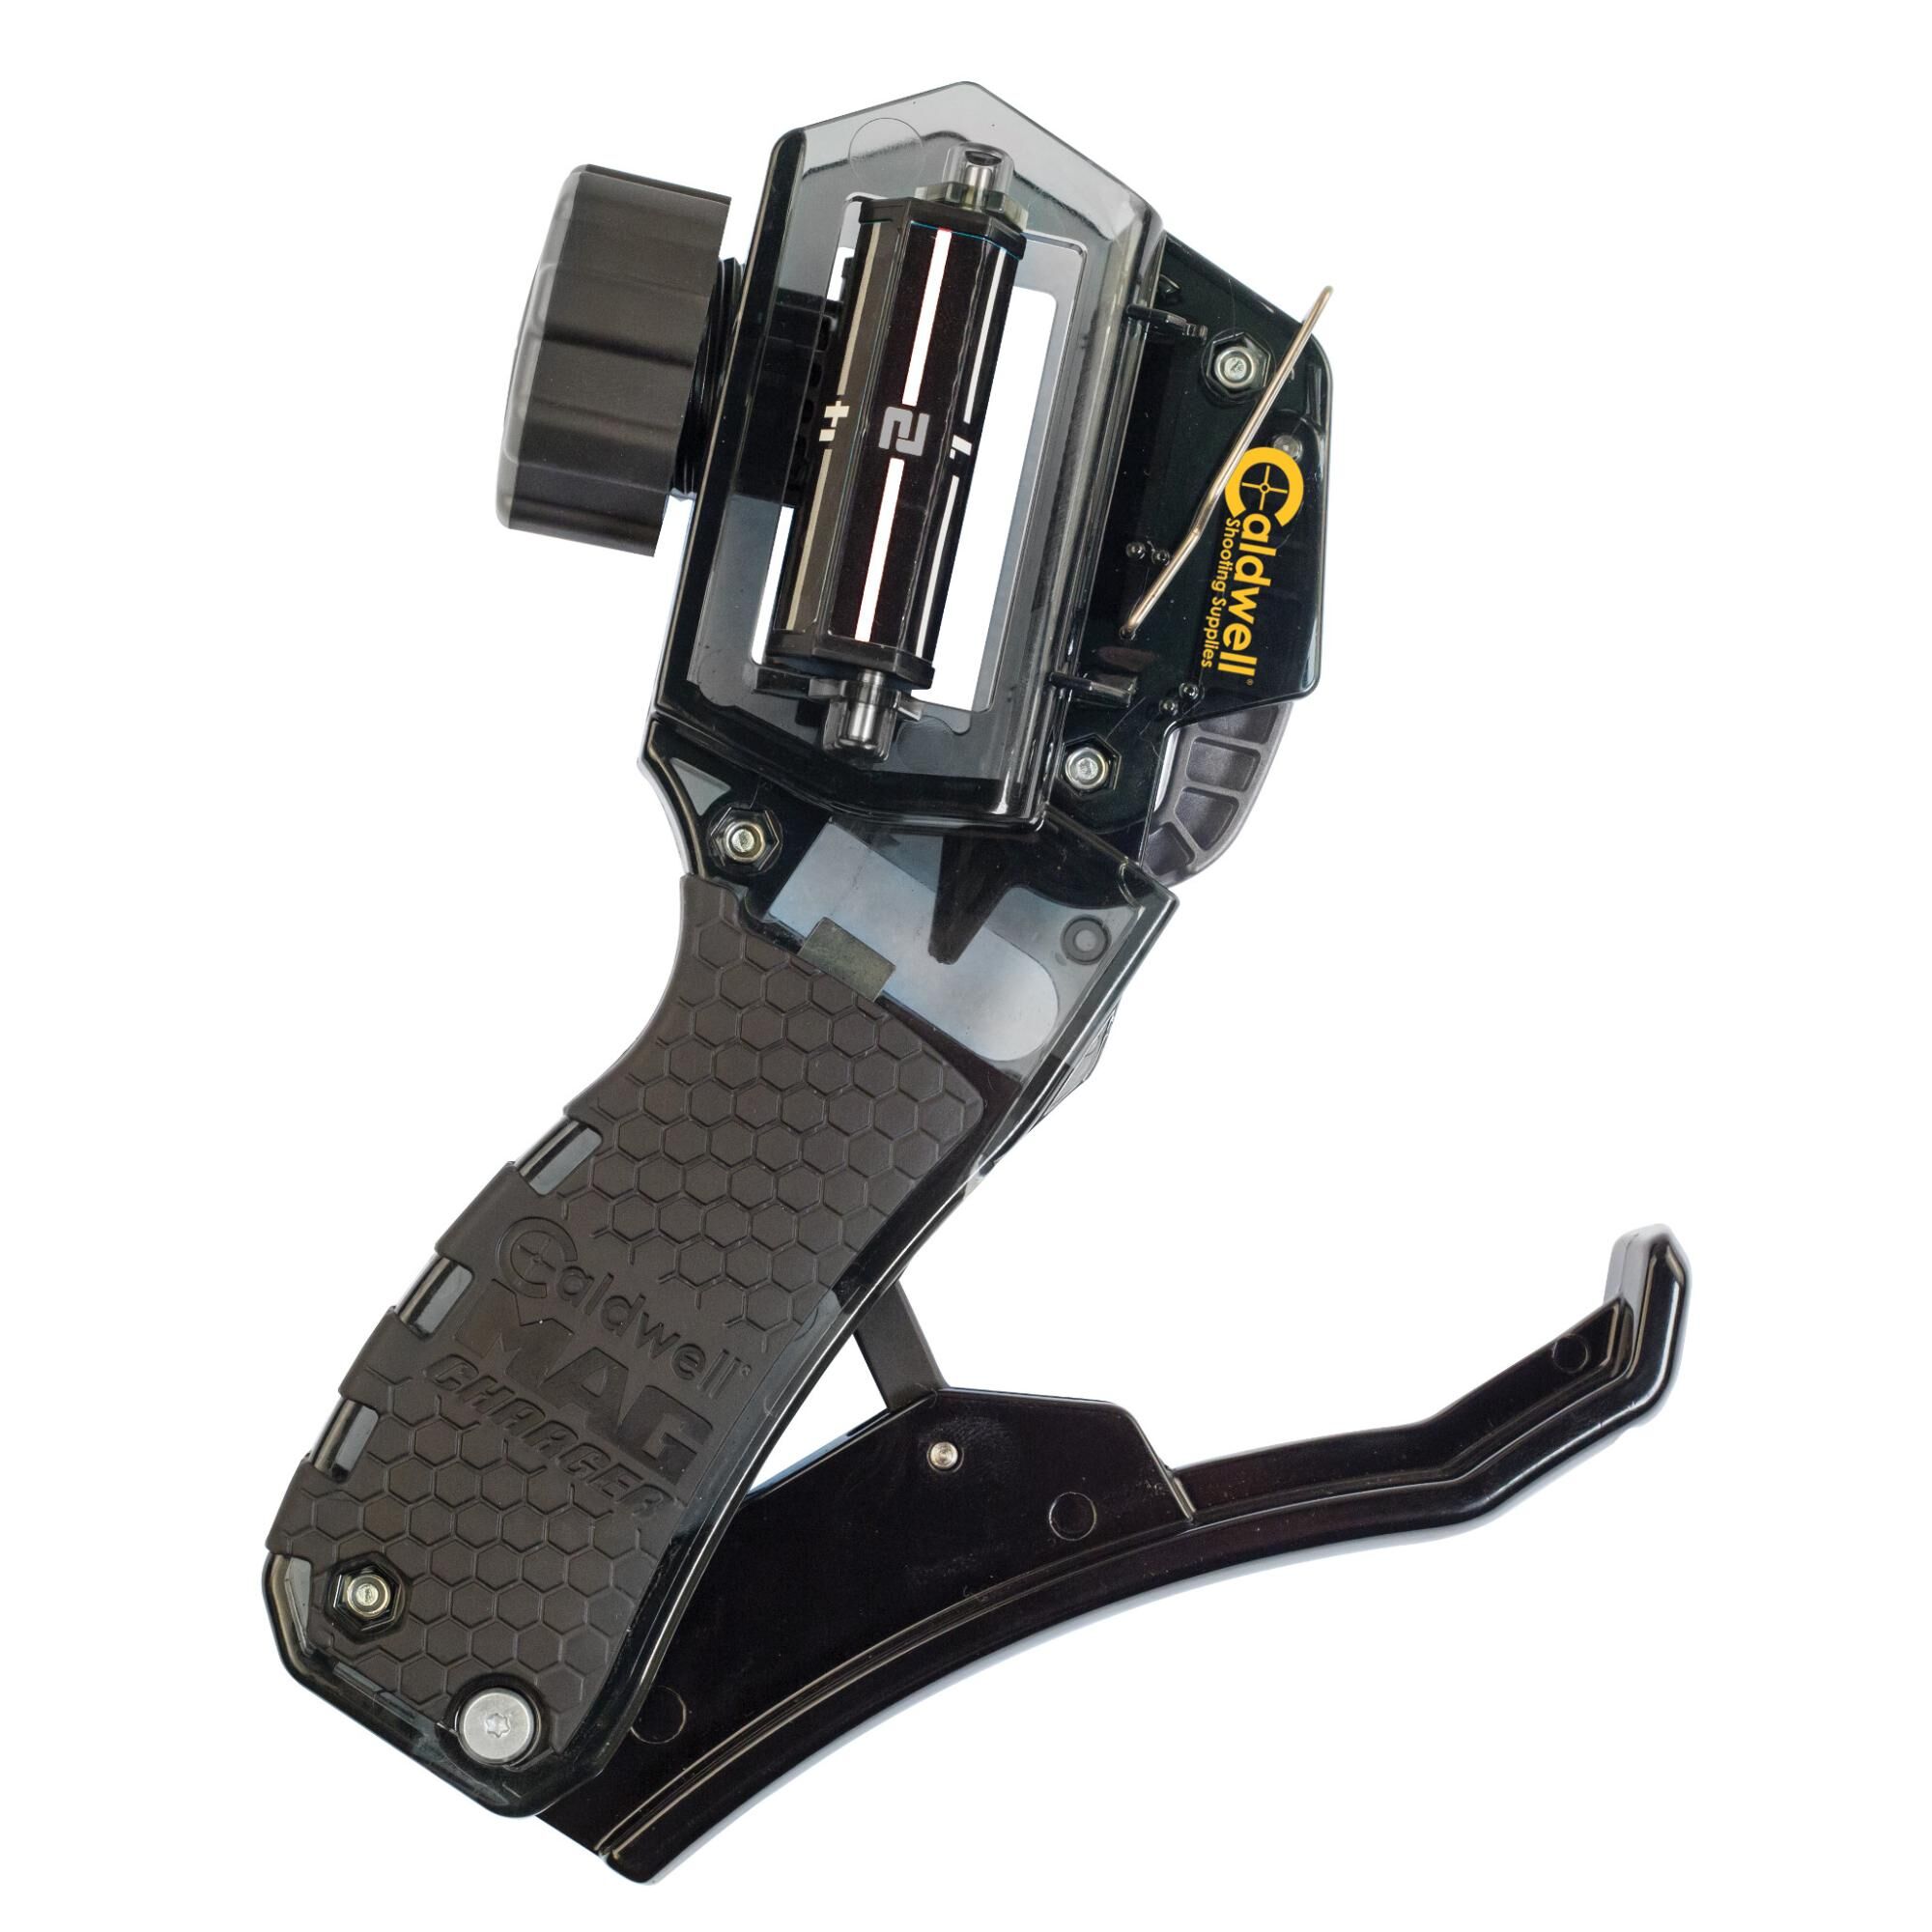 Caldwell - Magazine Charger Universal Pistol Loader